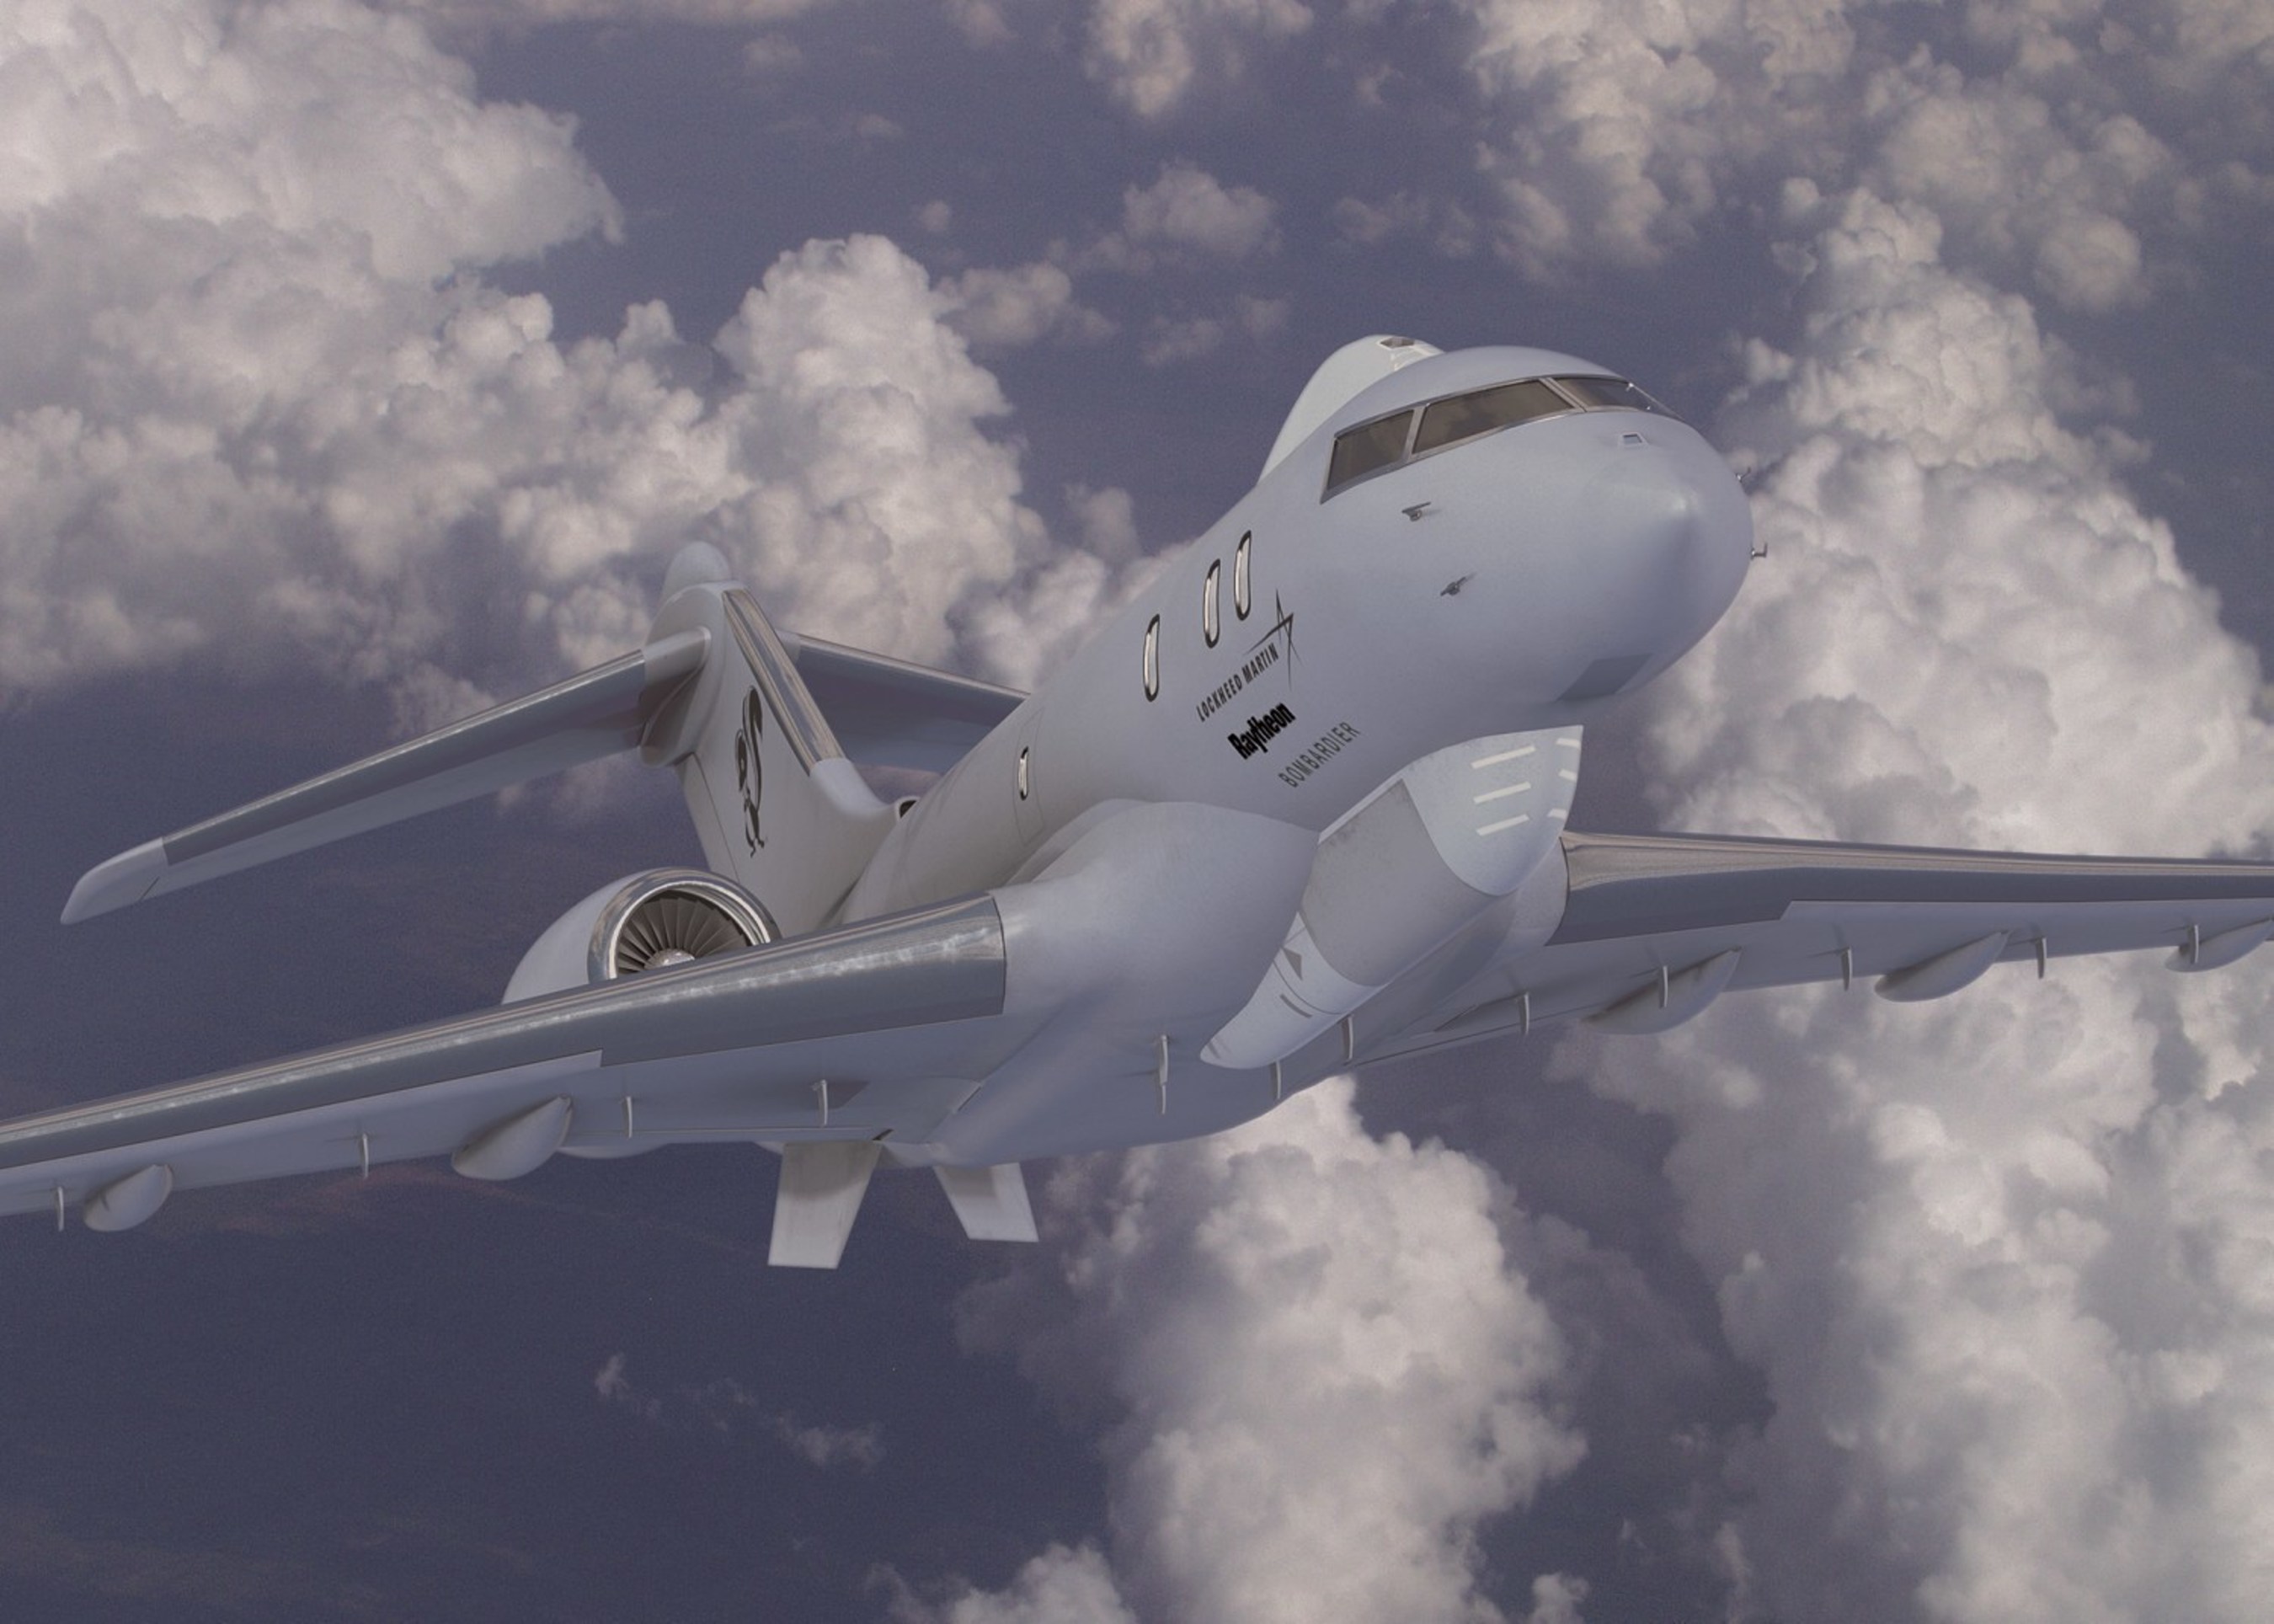 An artist's concept of the JSTARS Recap business jet platform proposed by the Lockheed Martin-led team with Raytheon and Bombardier.